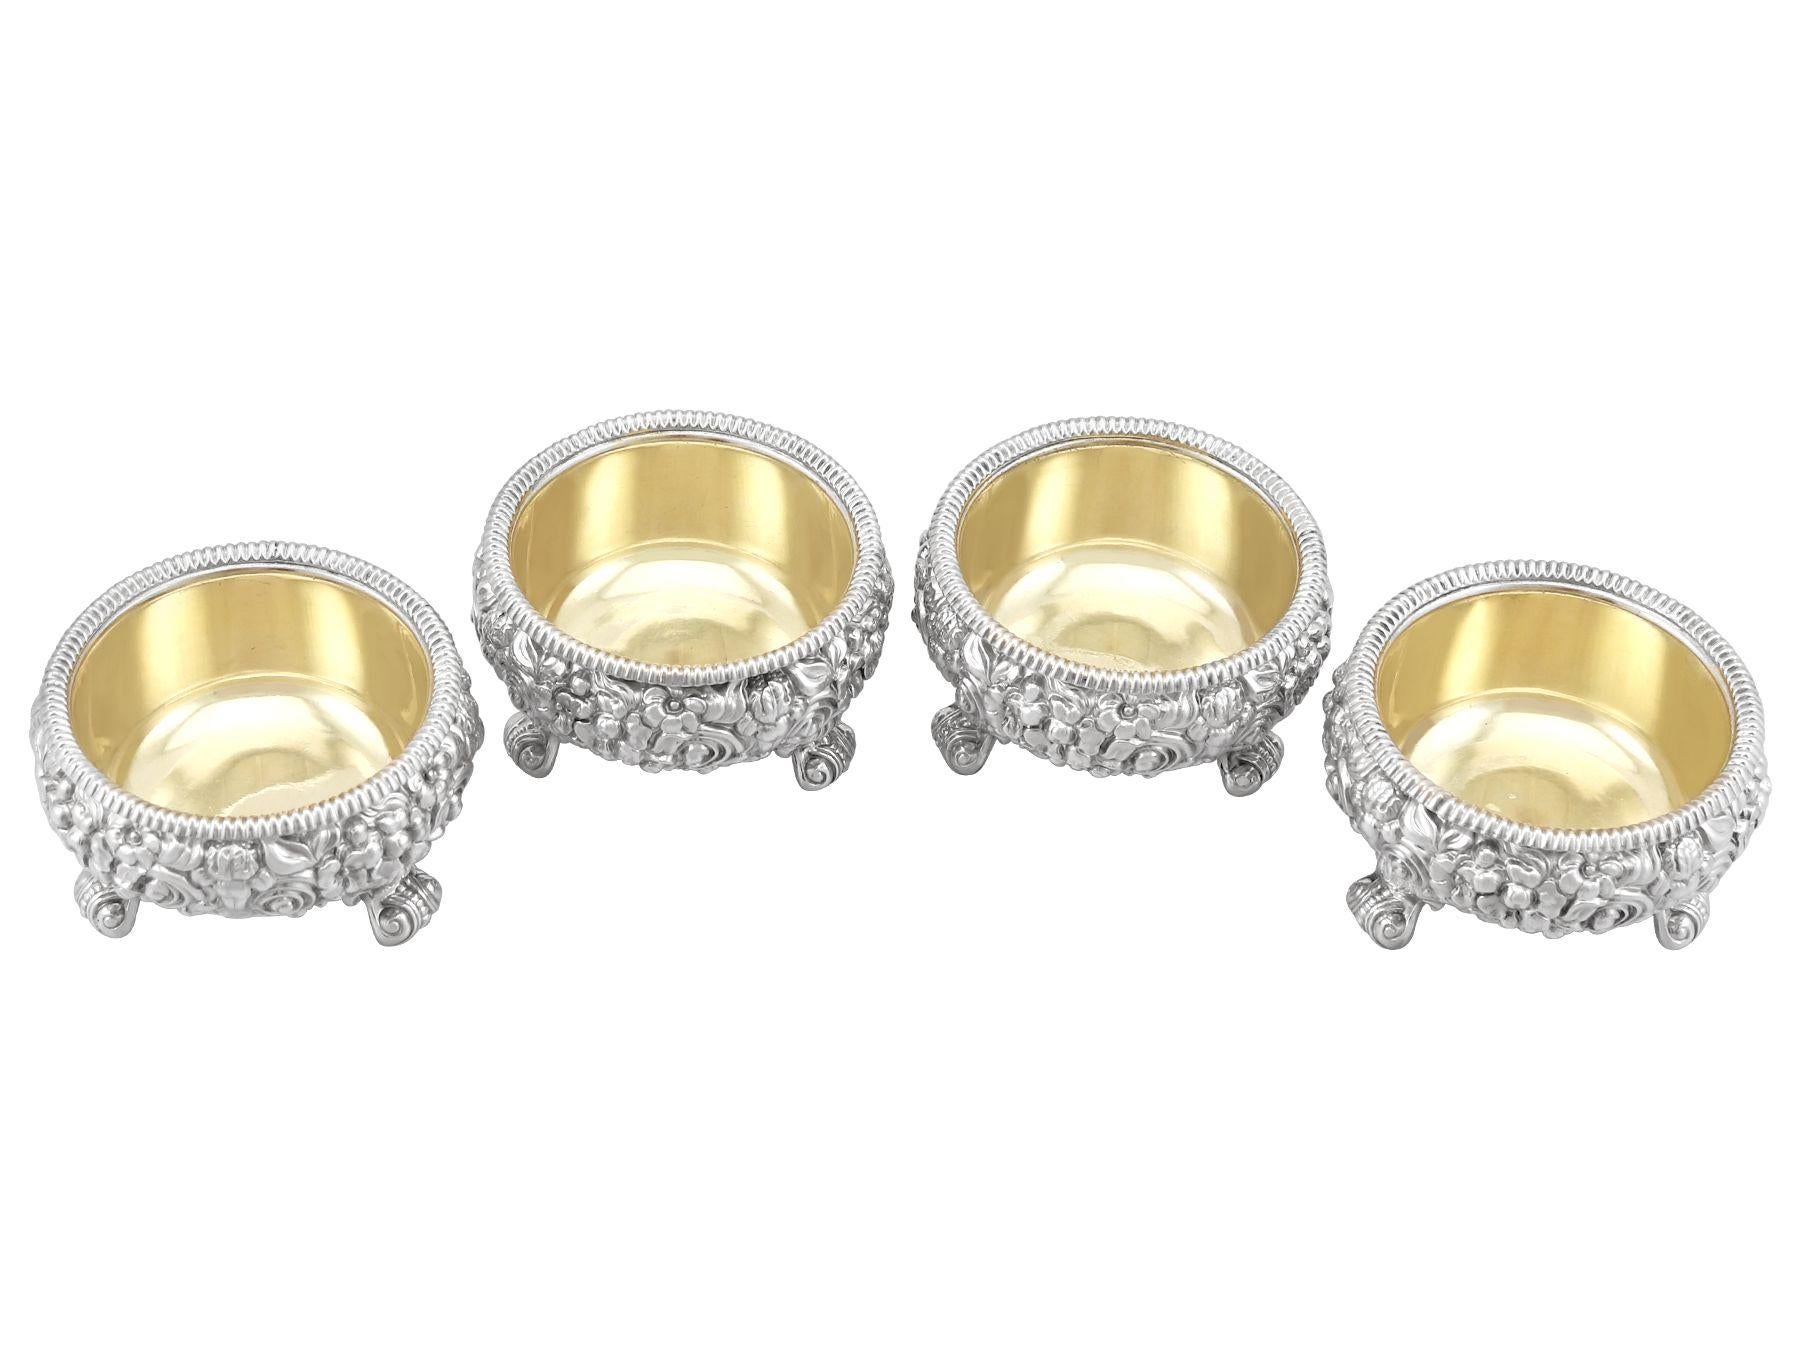 An exceptional, fine and impressive set of four antique Georgian English sterling silver salts; an addition to our silver cruet and condiment collection

These exceptional antique George III sterling silver salts have a circular cauldron shaped